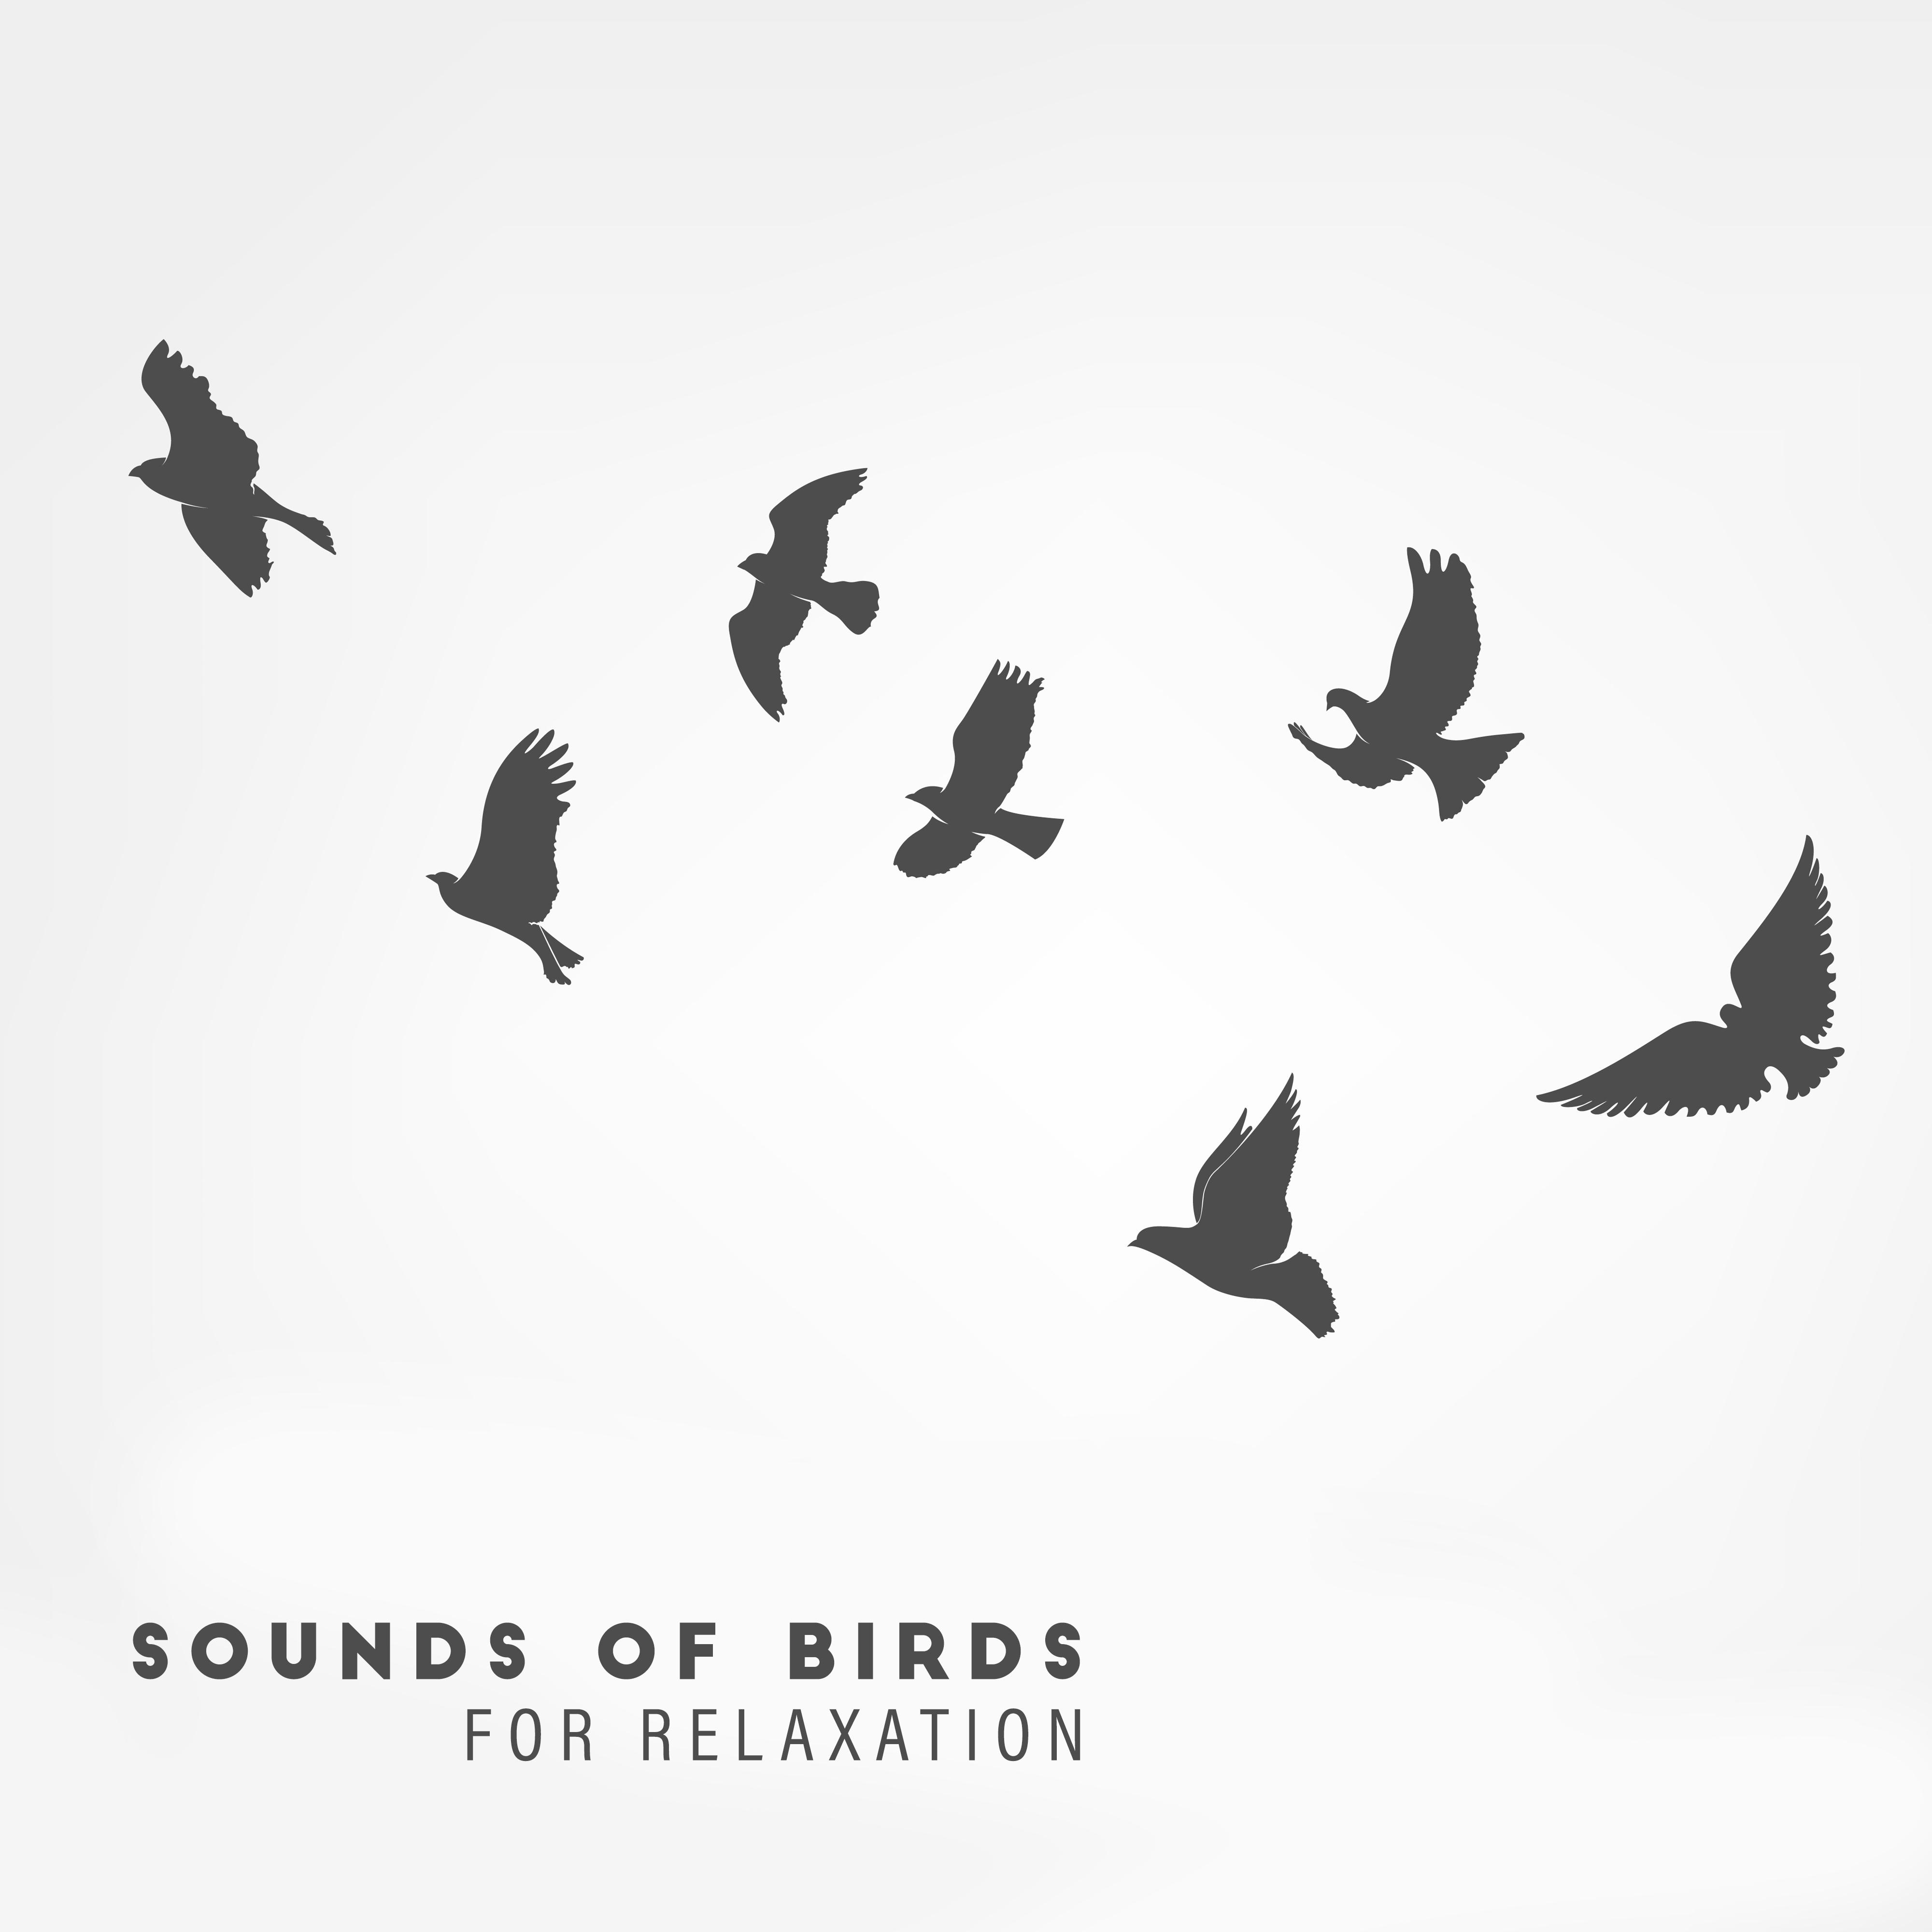 Sounds of Birds for Relaxation  Zen Lounge, Nature Sounds to Calm Down, Reduce Stress, Healing Music for Rest, Sleep, Meditation Music Zone